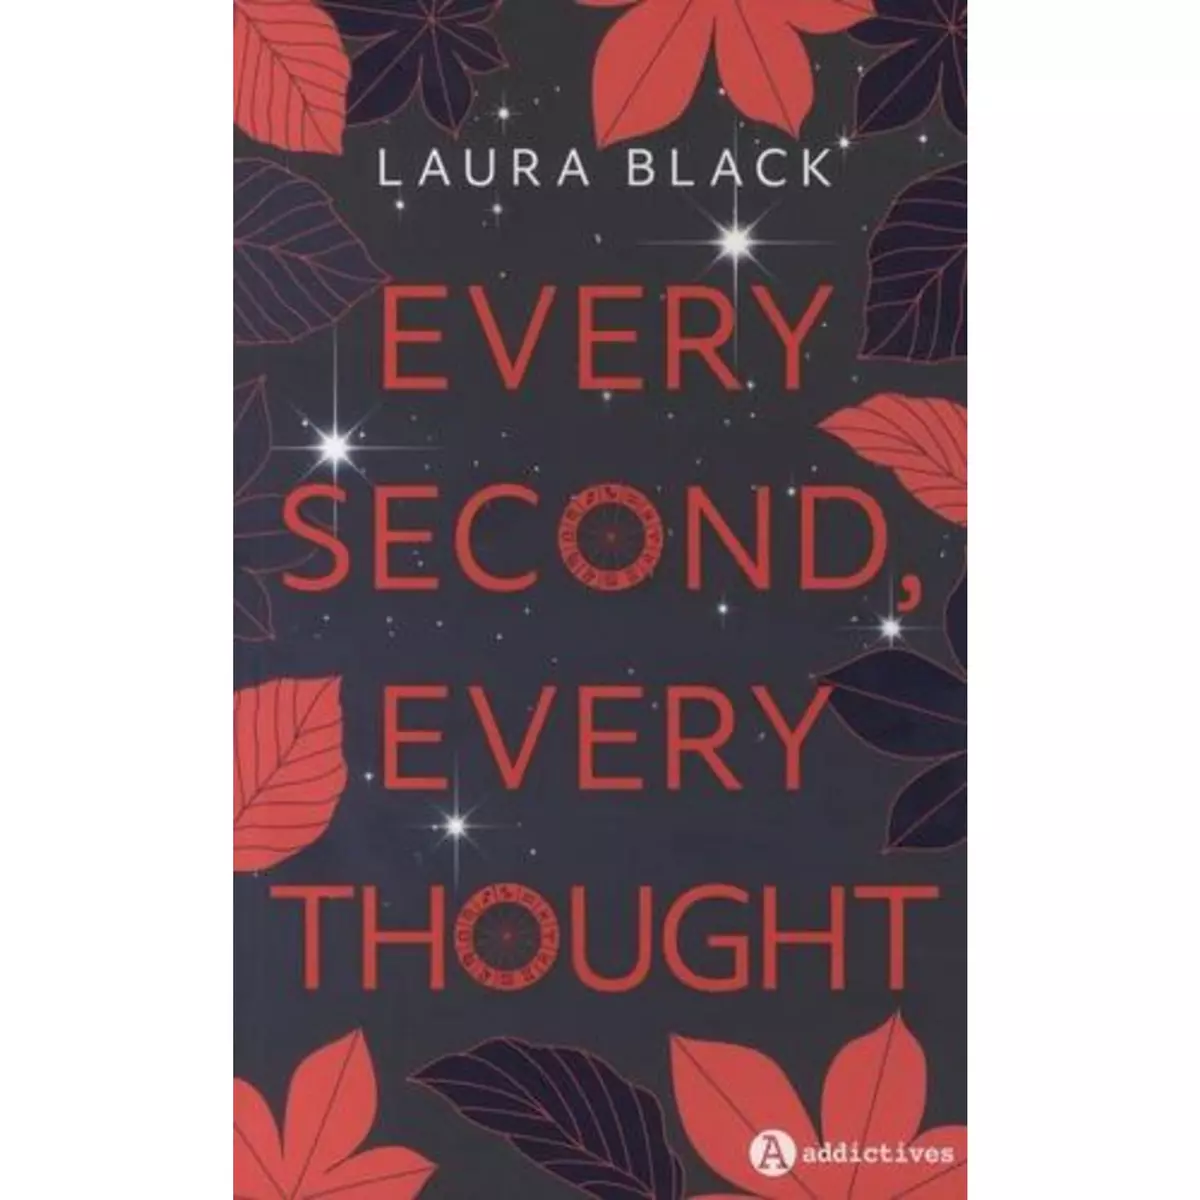  EVERY SECOND, EVERY THOUGHT, Black Laura